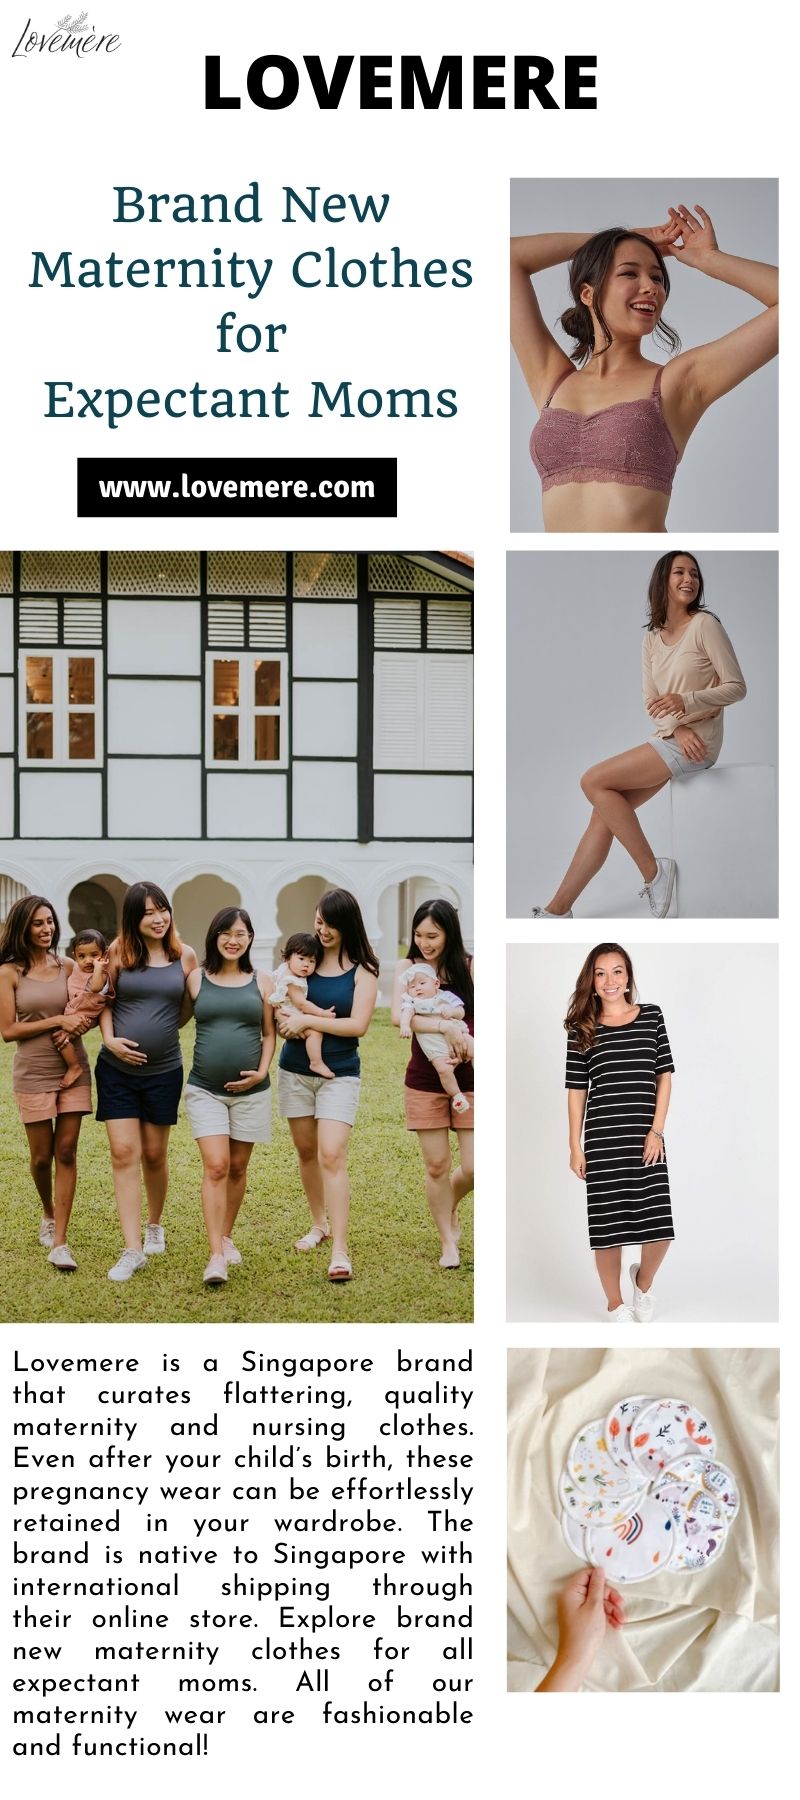 Brand New Maternity Clothes for Expectant Moms - Lovemere